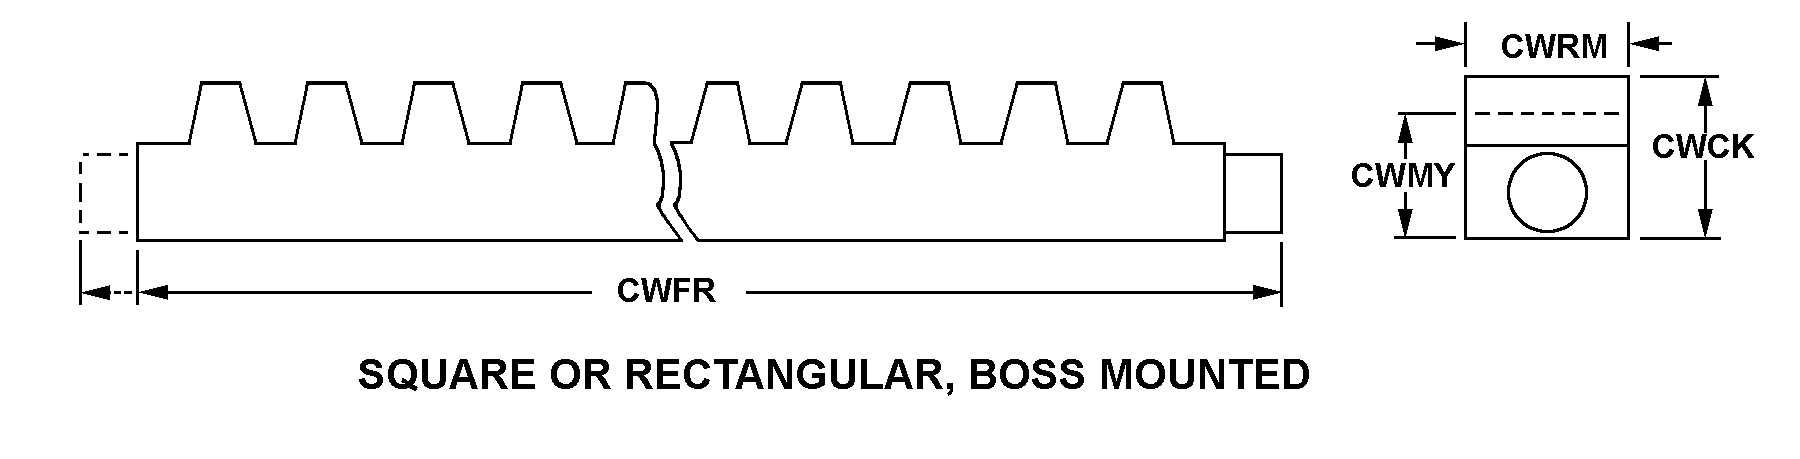 SQUARE OR RECTANGULAR, BOSS MOUNTED style nsn 3020-01-016-9771